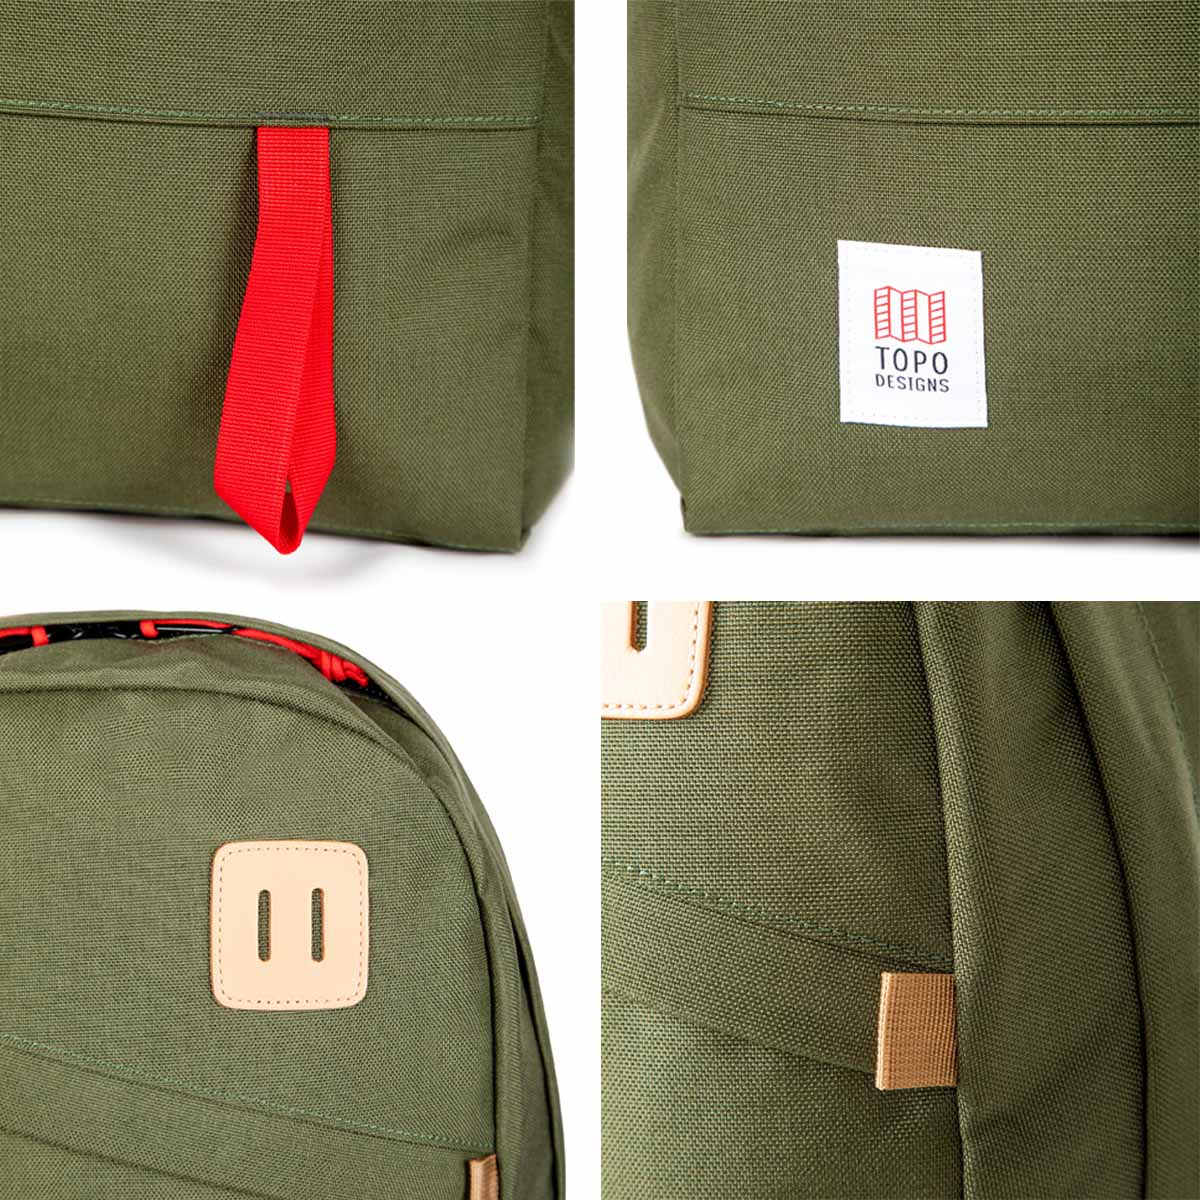 Topo Designs Daypack Classic Olive, details